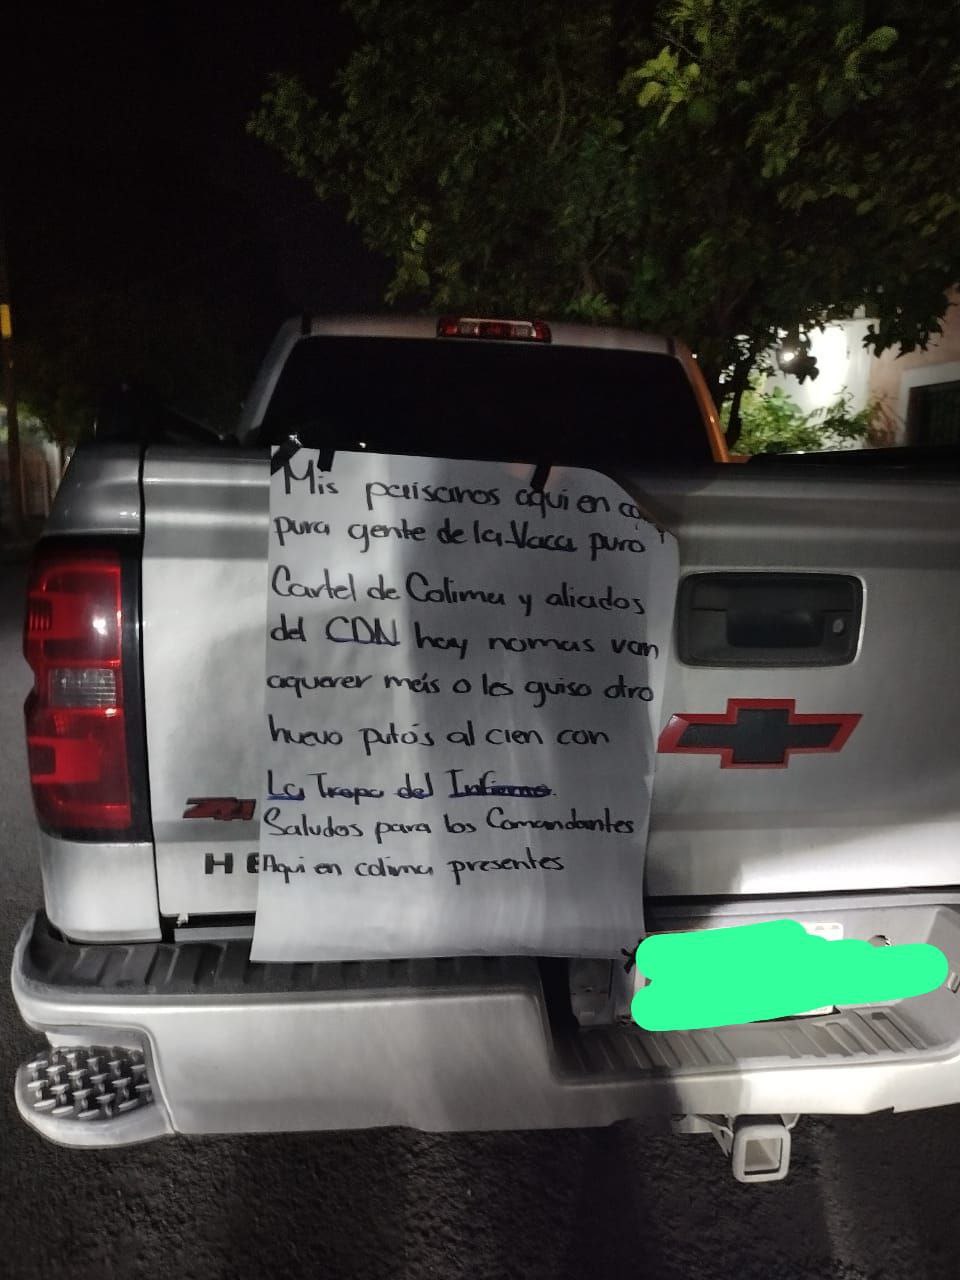 Another of the messages was on a white van (Photo: Twitter/@OscarAdrianL)